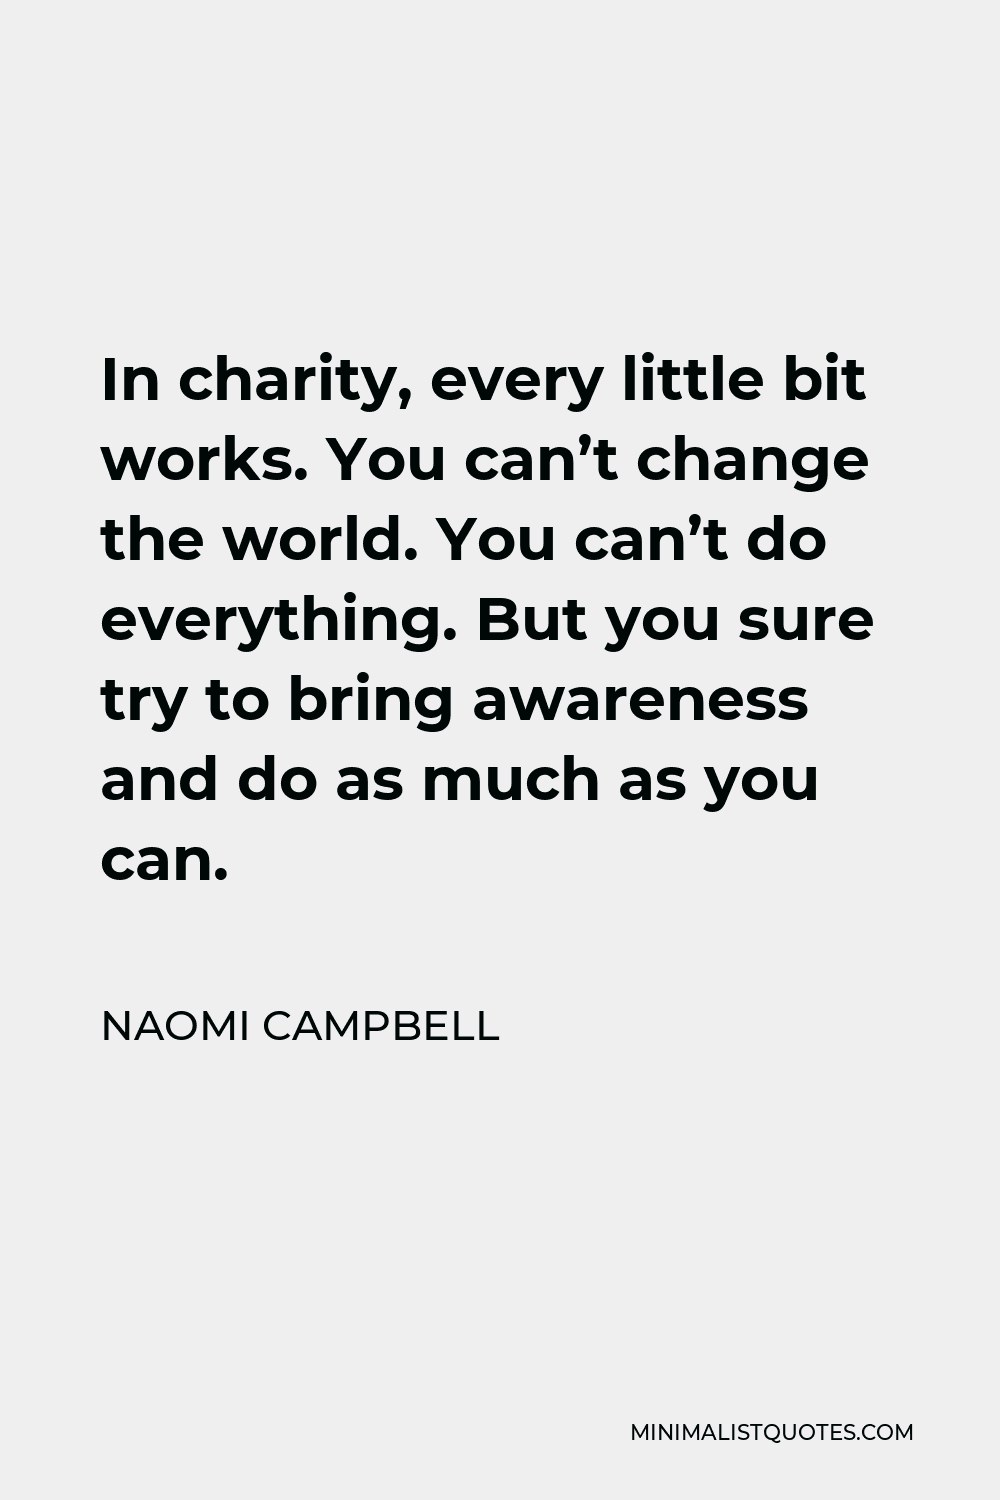 Naomi Campbell Quote - In charity, every little bit works. You can’t change the world. You can’t do everything. But you sure try to bring awareness and do as much as you can.